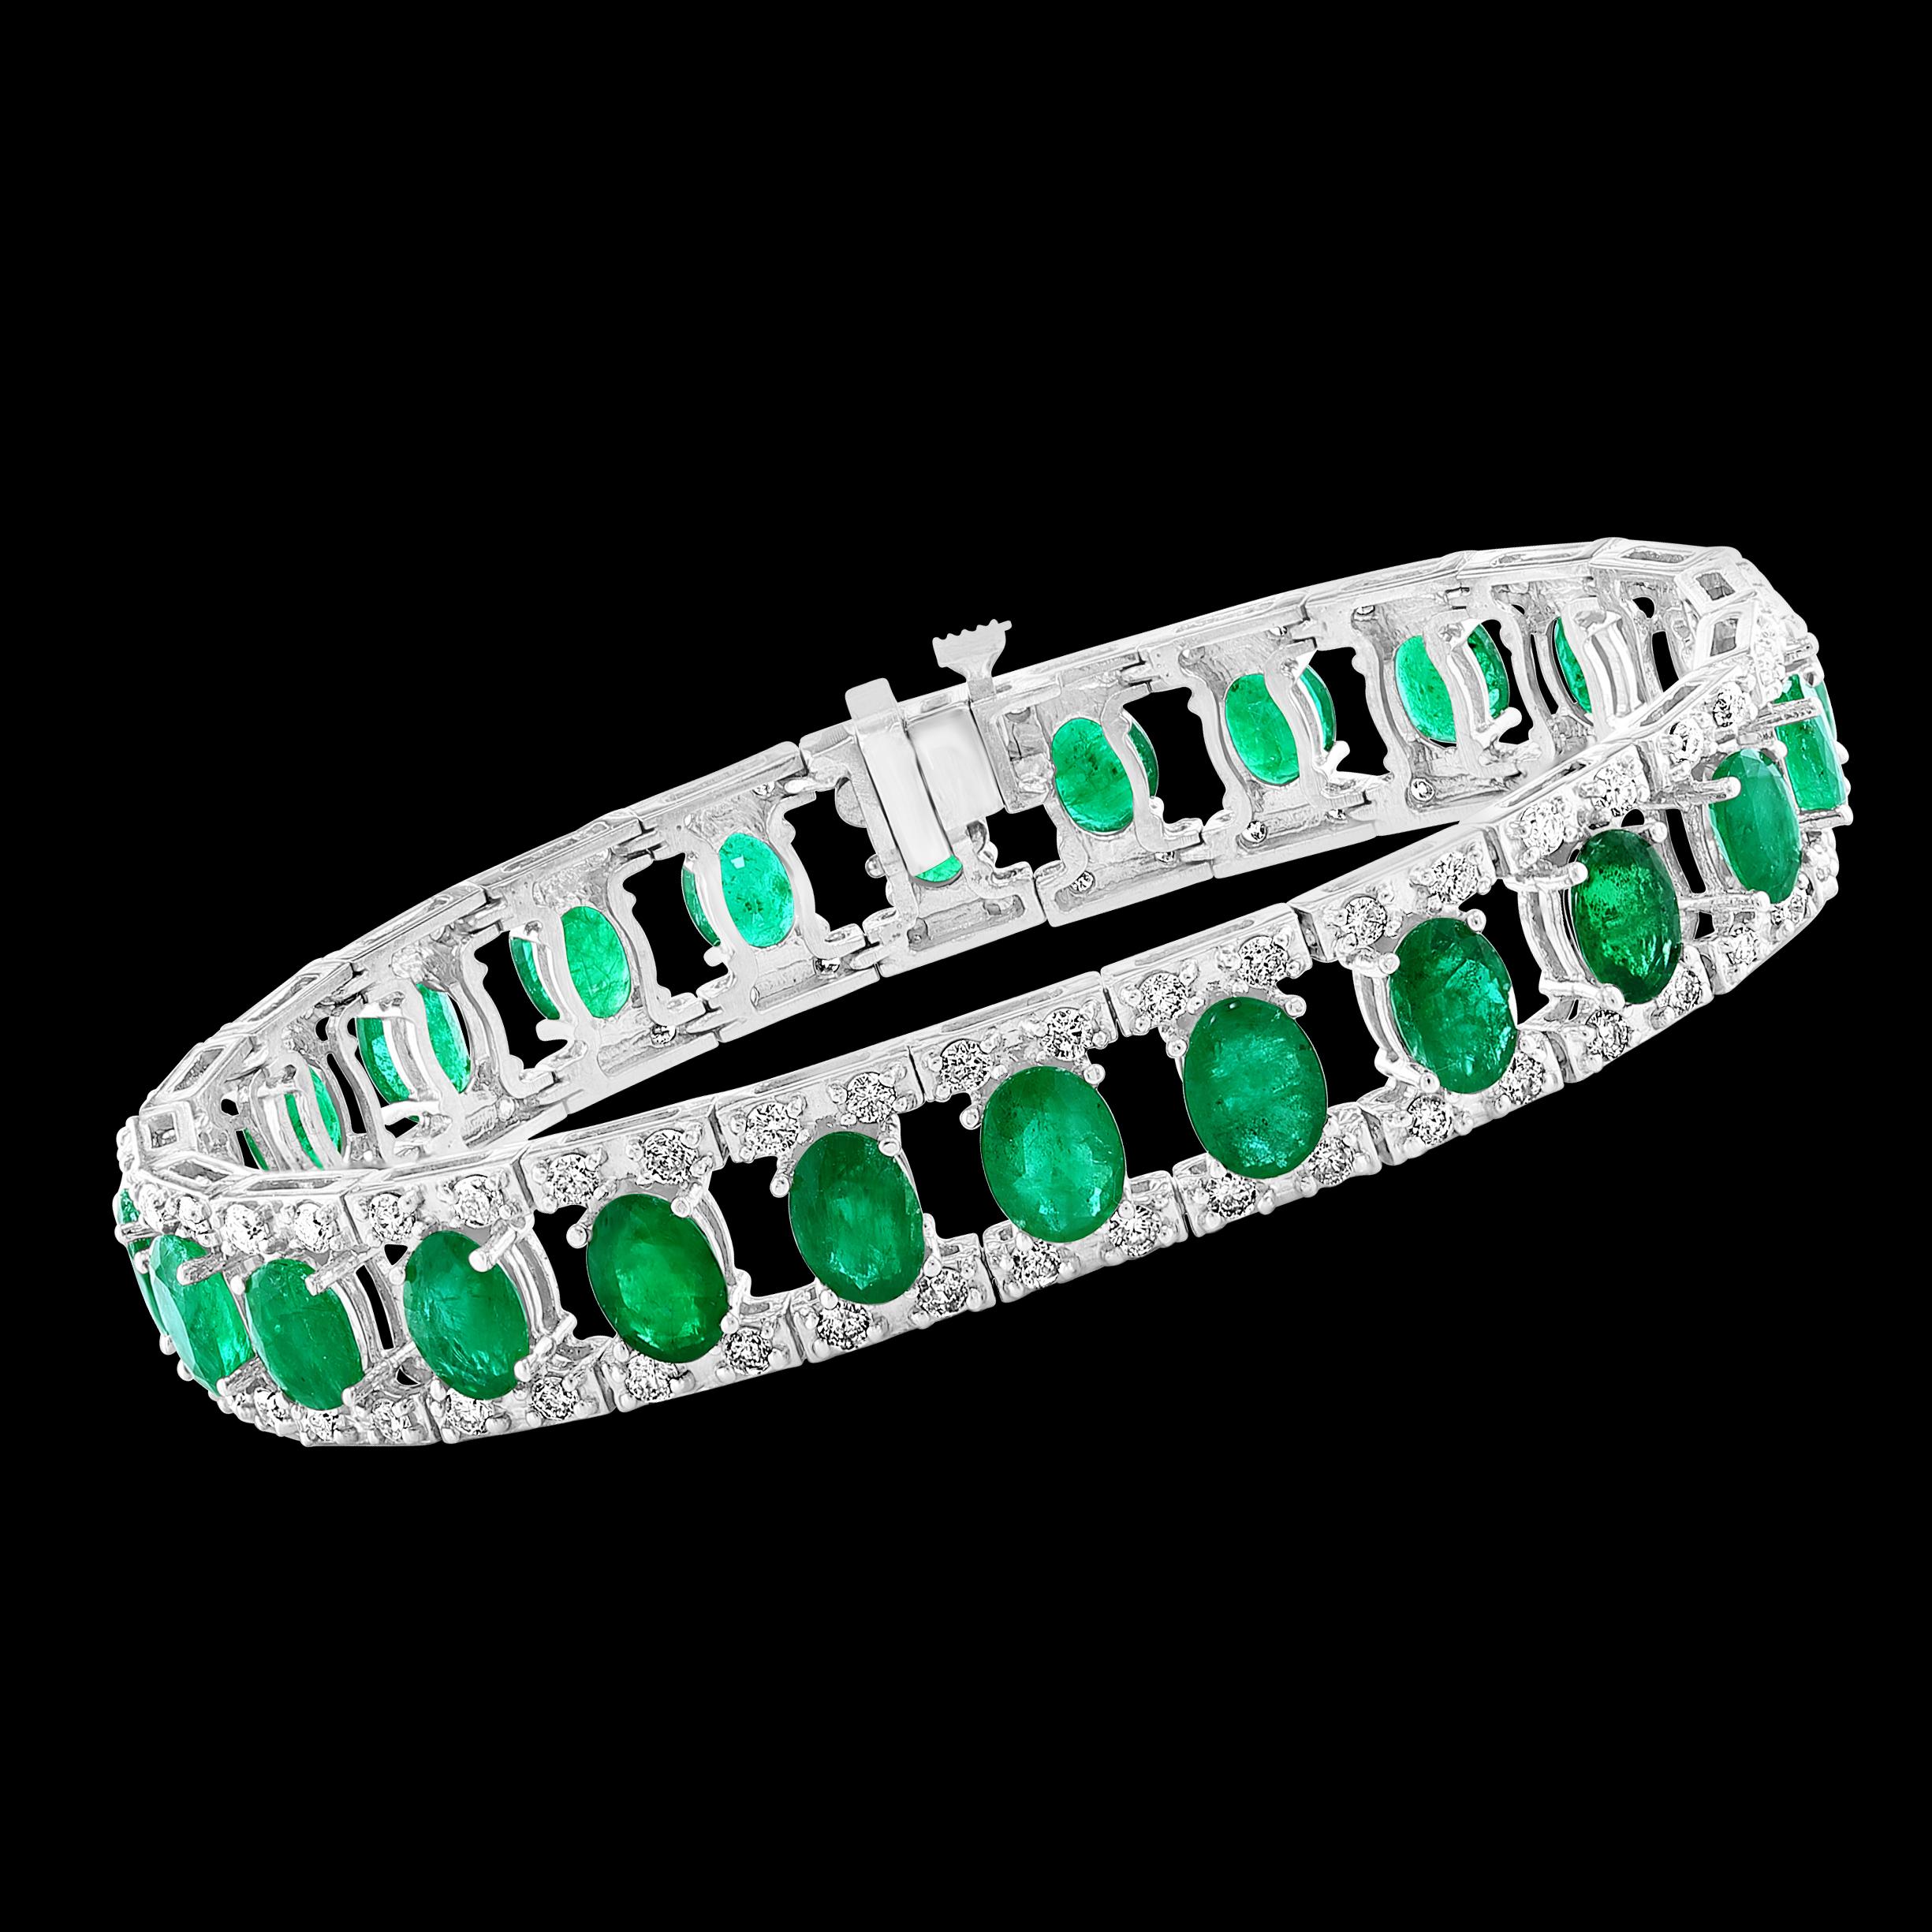 18 Carat Natural Emerald & Diamond Cocktail Tennis Bracelet 14 Karat White Gold
 This exceptionally affordable Tennis  bracelet has  24 stones of oval  Emeralds  .  Total weight of the Emeralds is  approximately 18 carat. 
The bracelet is expertly